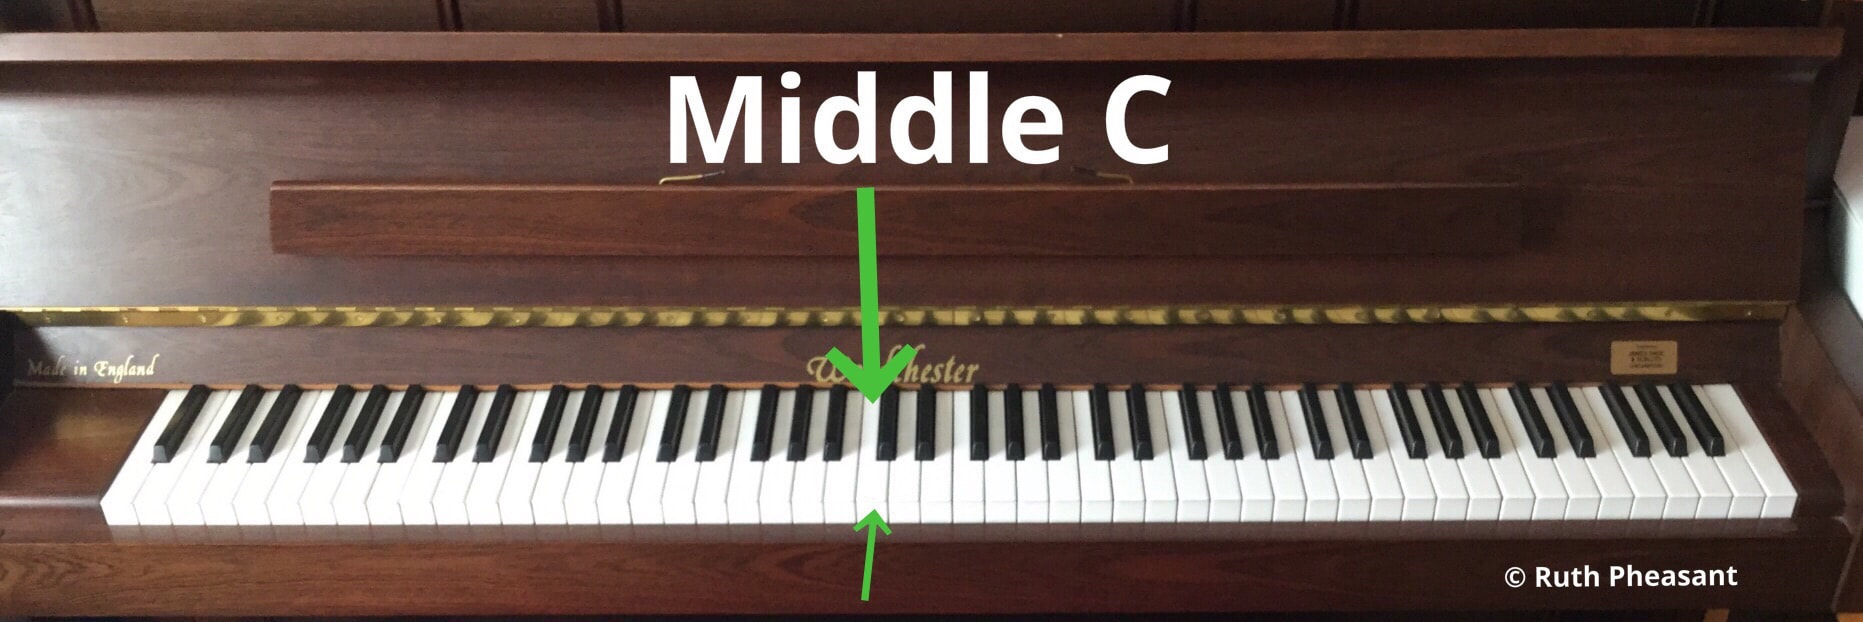 Piano Middle C